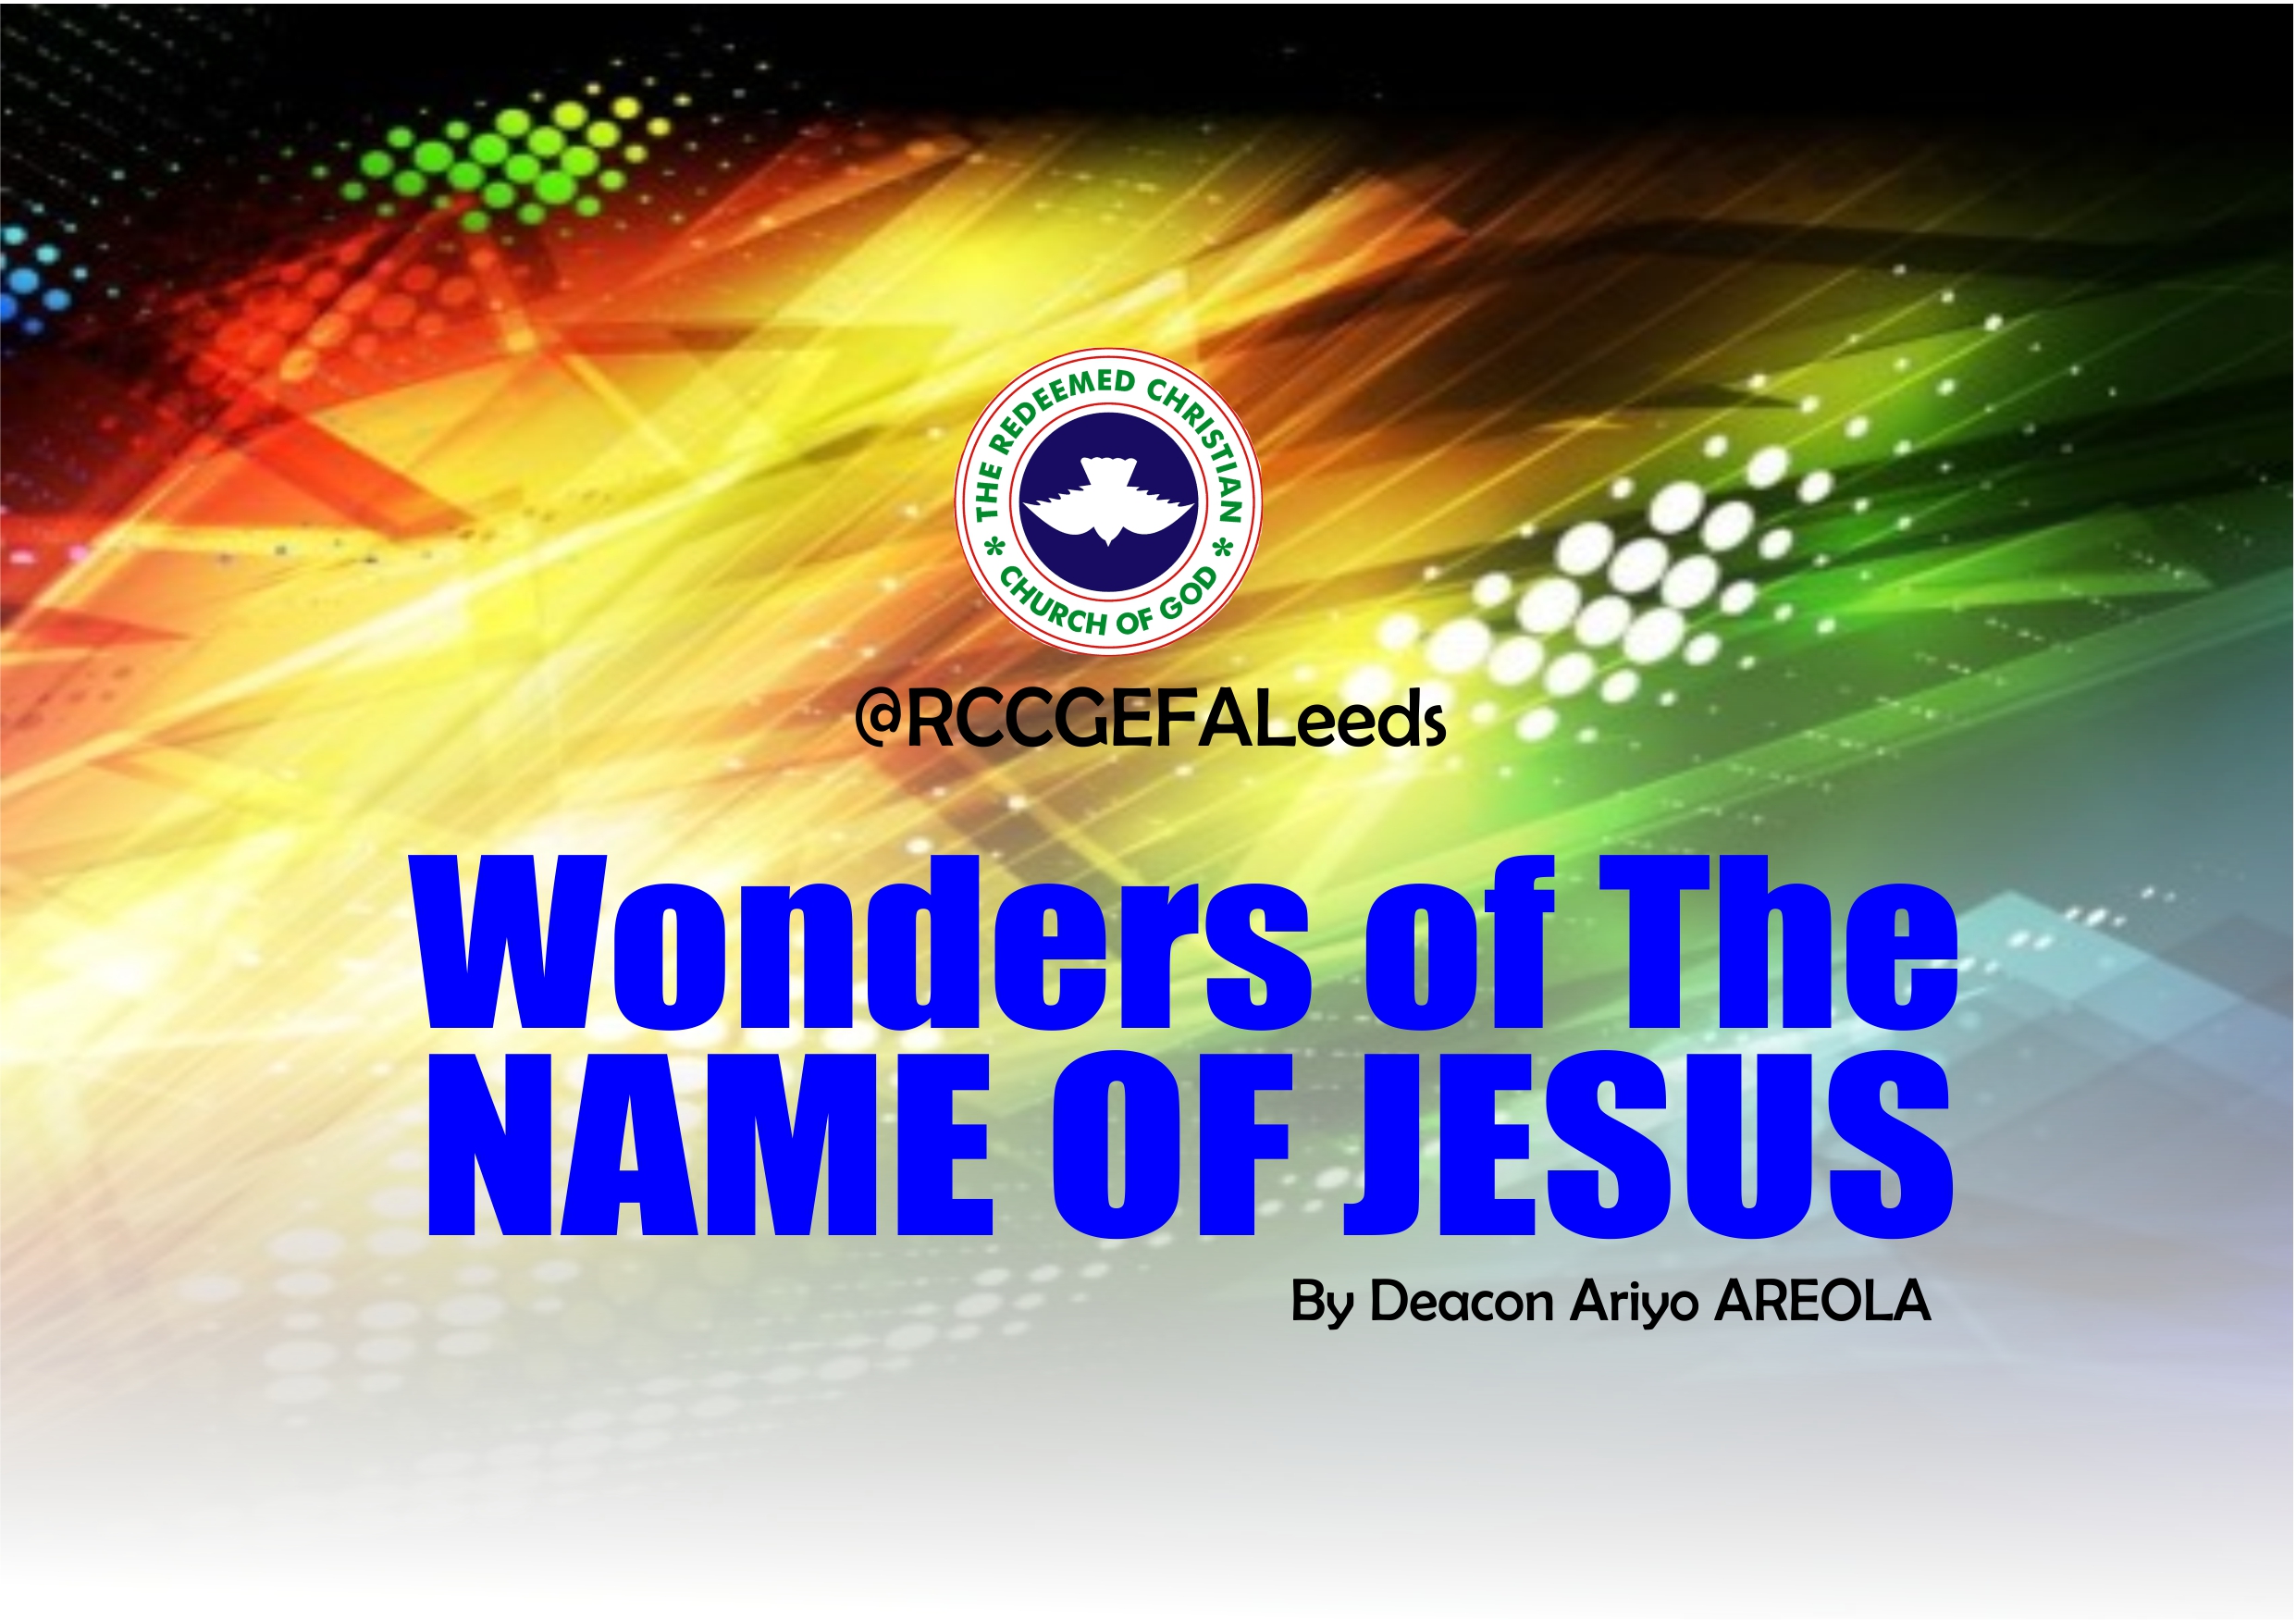 The Wonders of The Name of Jesus, by Deacon Ariyo Areola